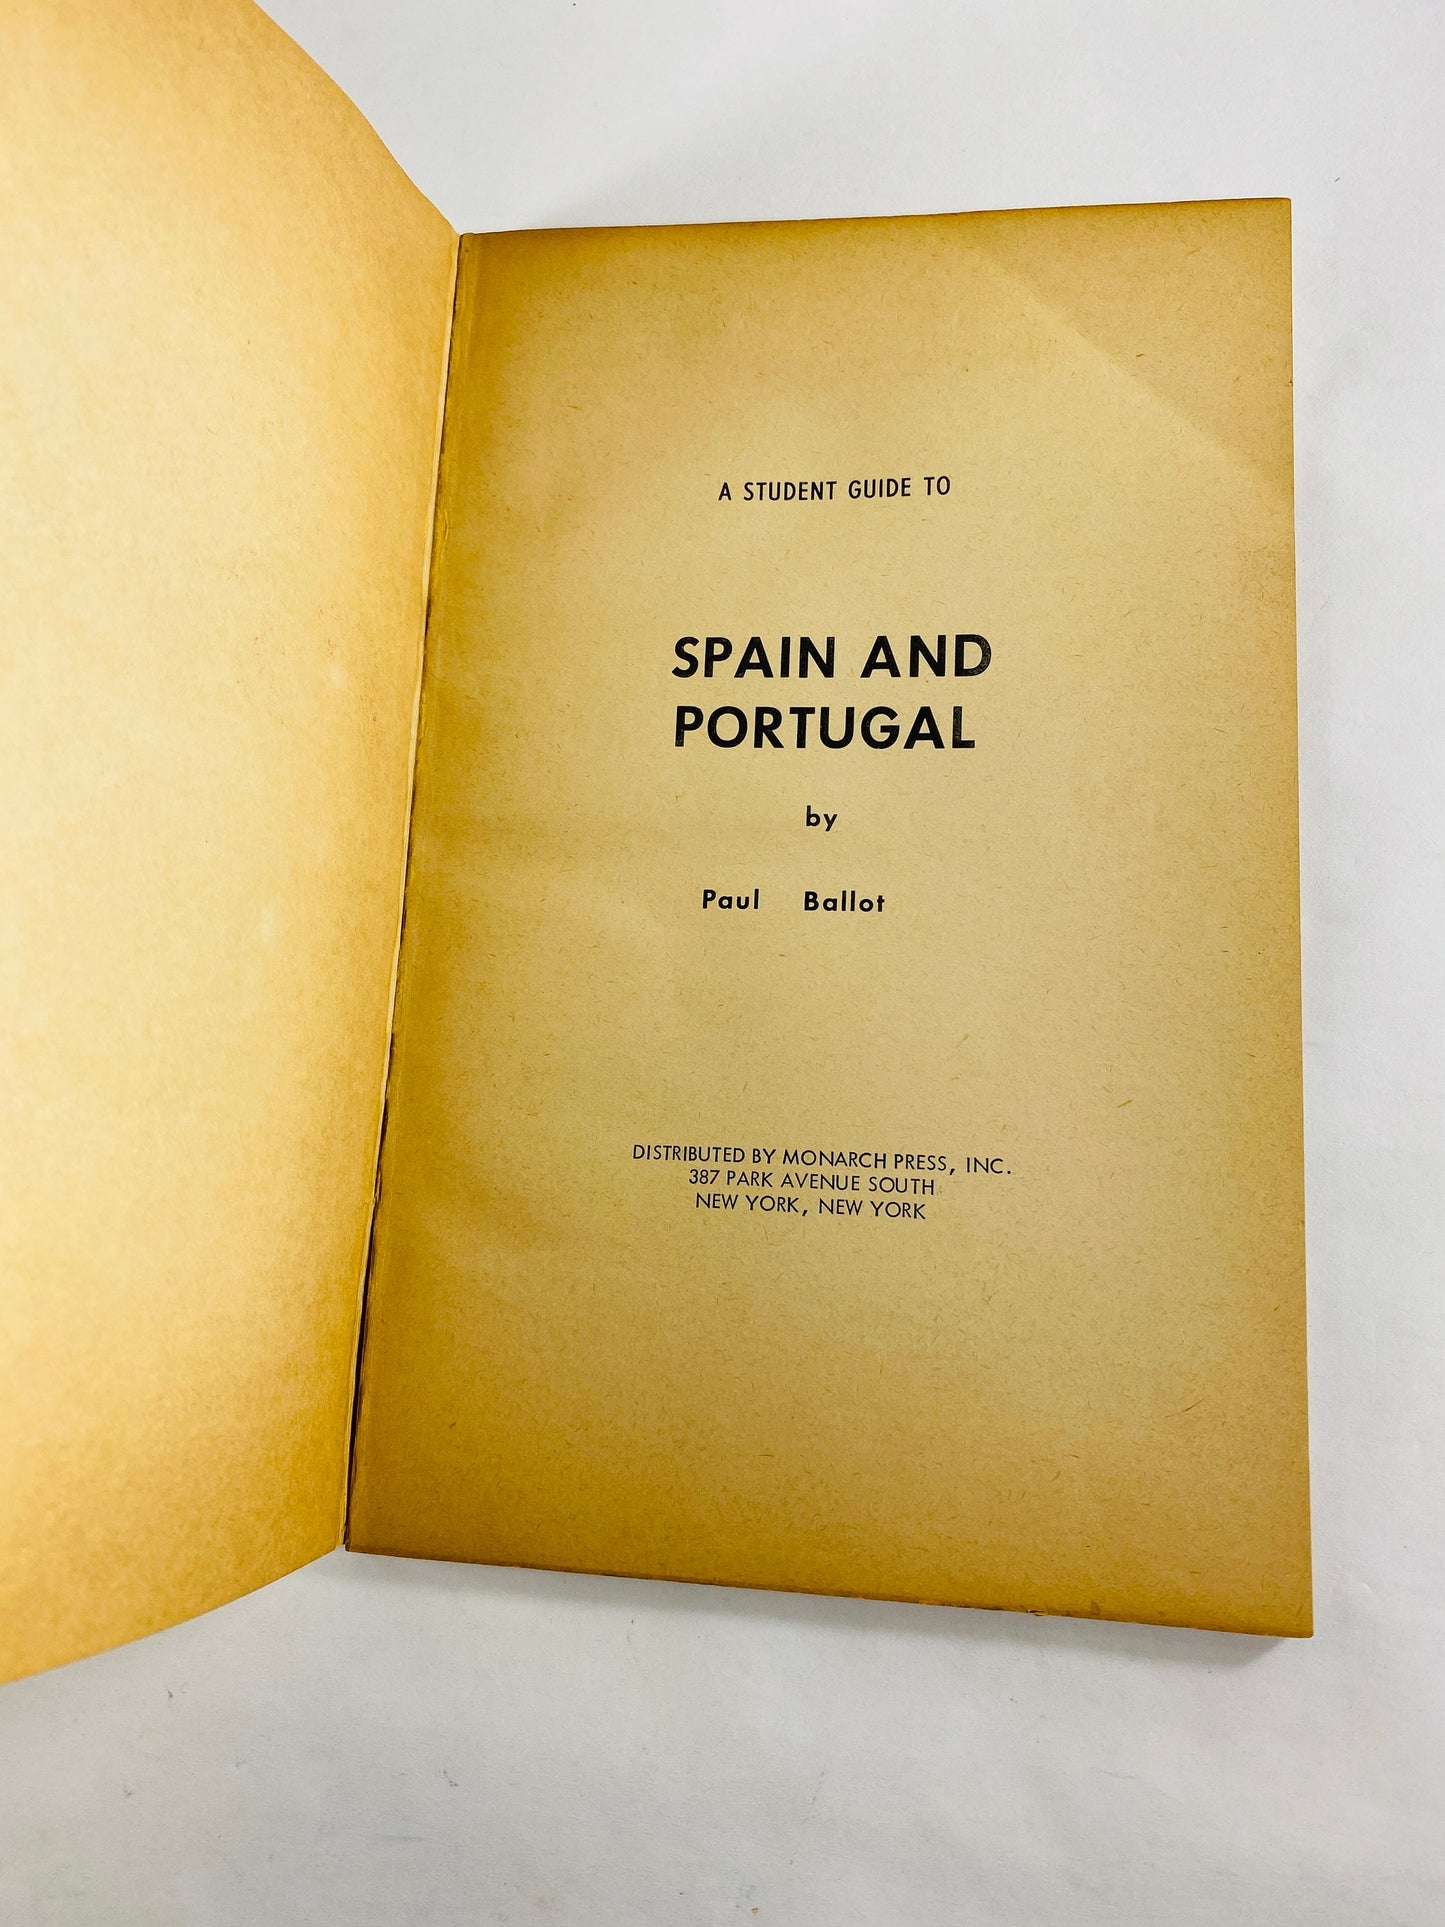 Vintage Spain and Portugal travel brochures guide circa 1965 written for student expats and visitors. Globe trotting decor gift